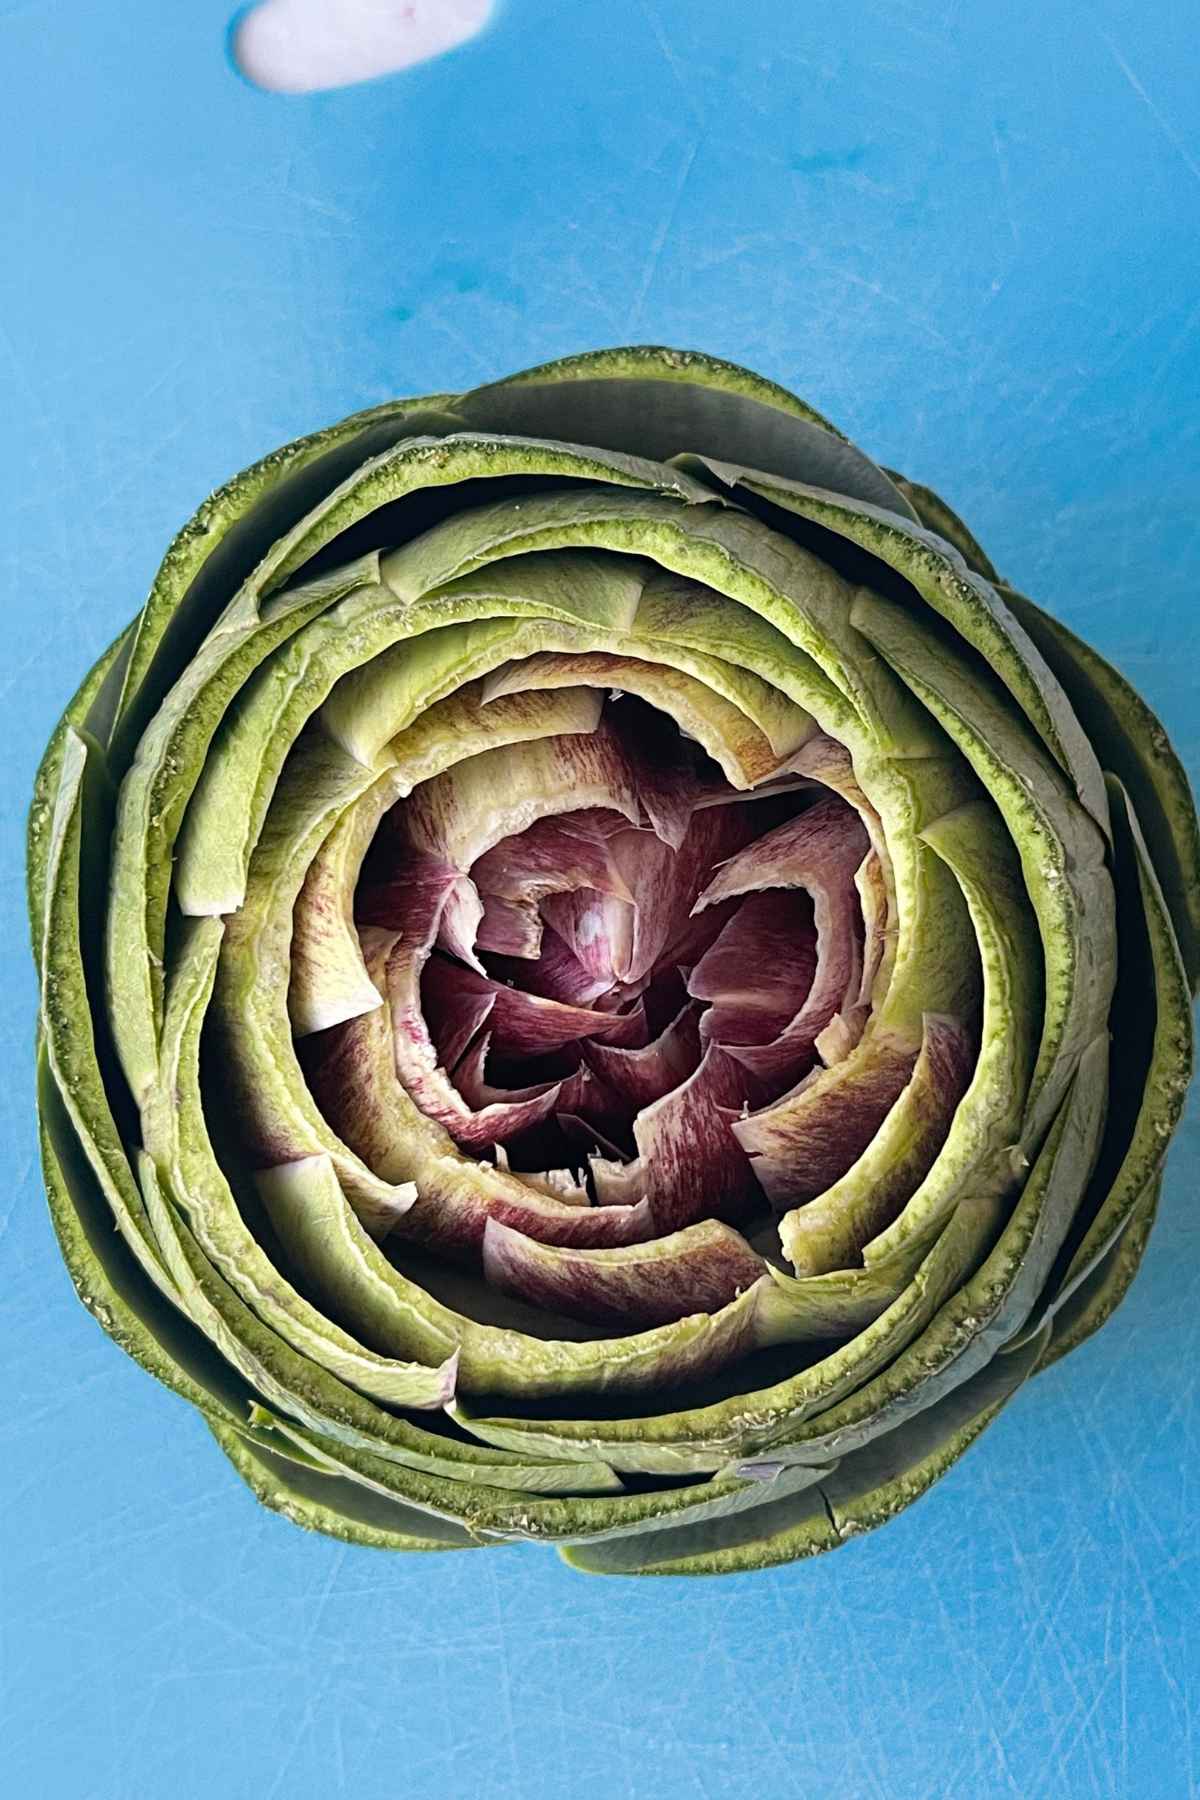 Artichoke with tips all cut off from the globe.